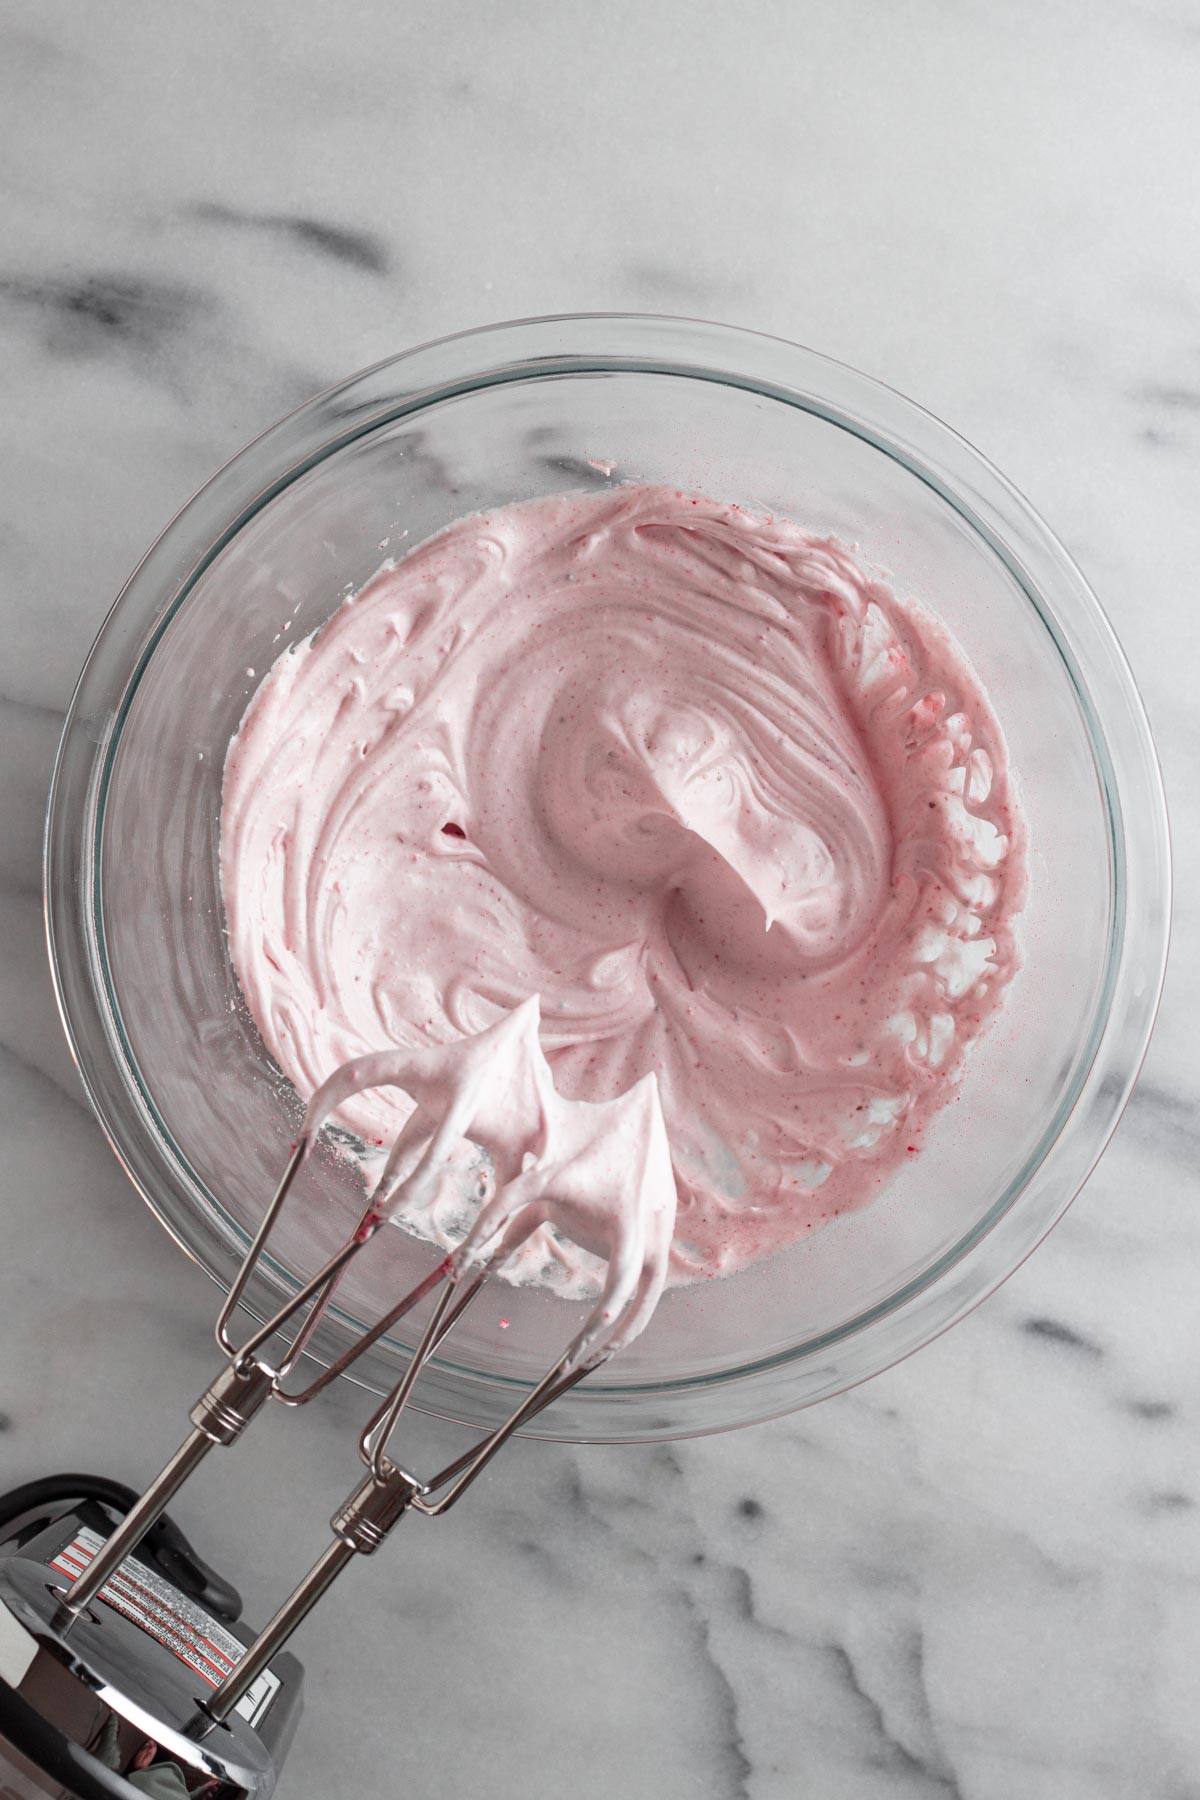 pink meringue in a glass bowl with an electric mixer